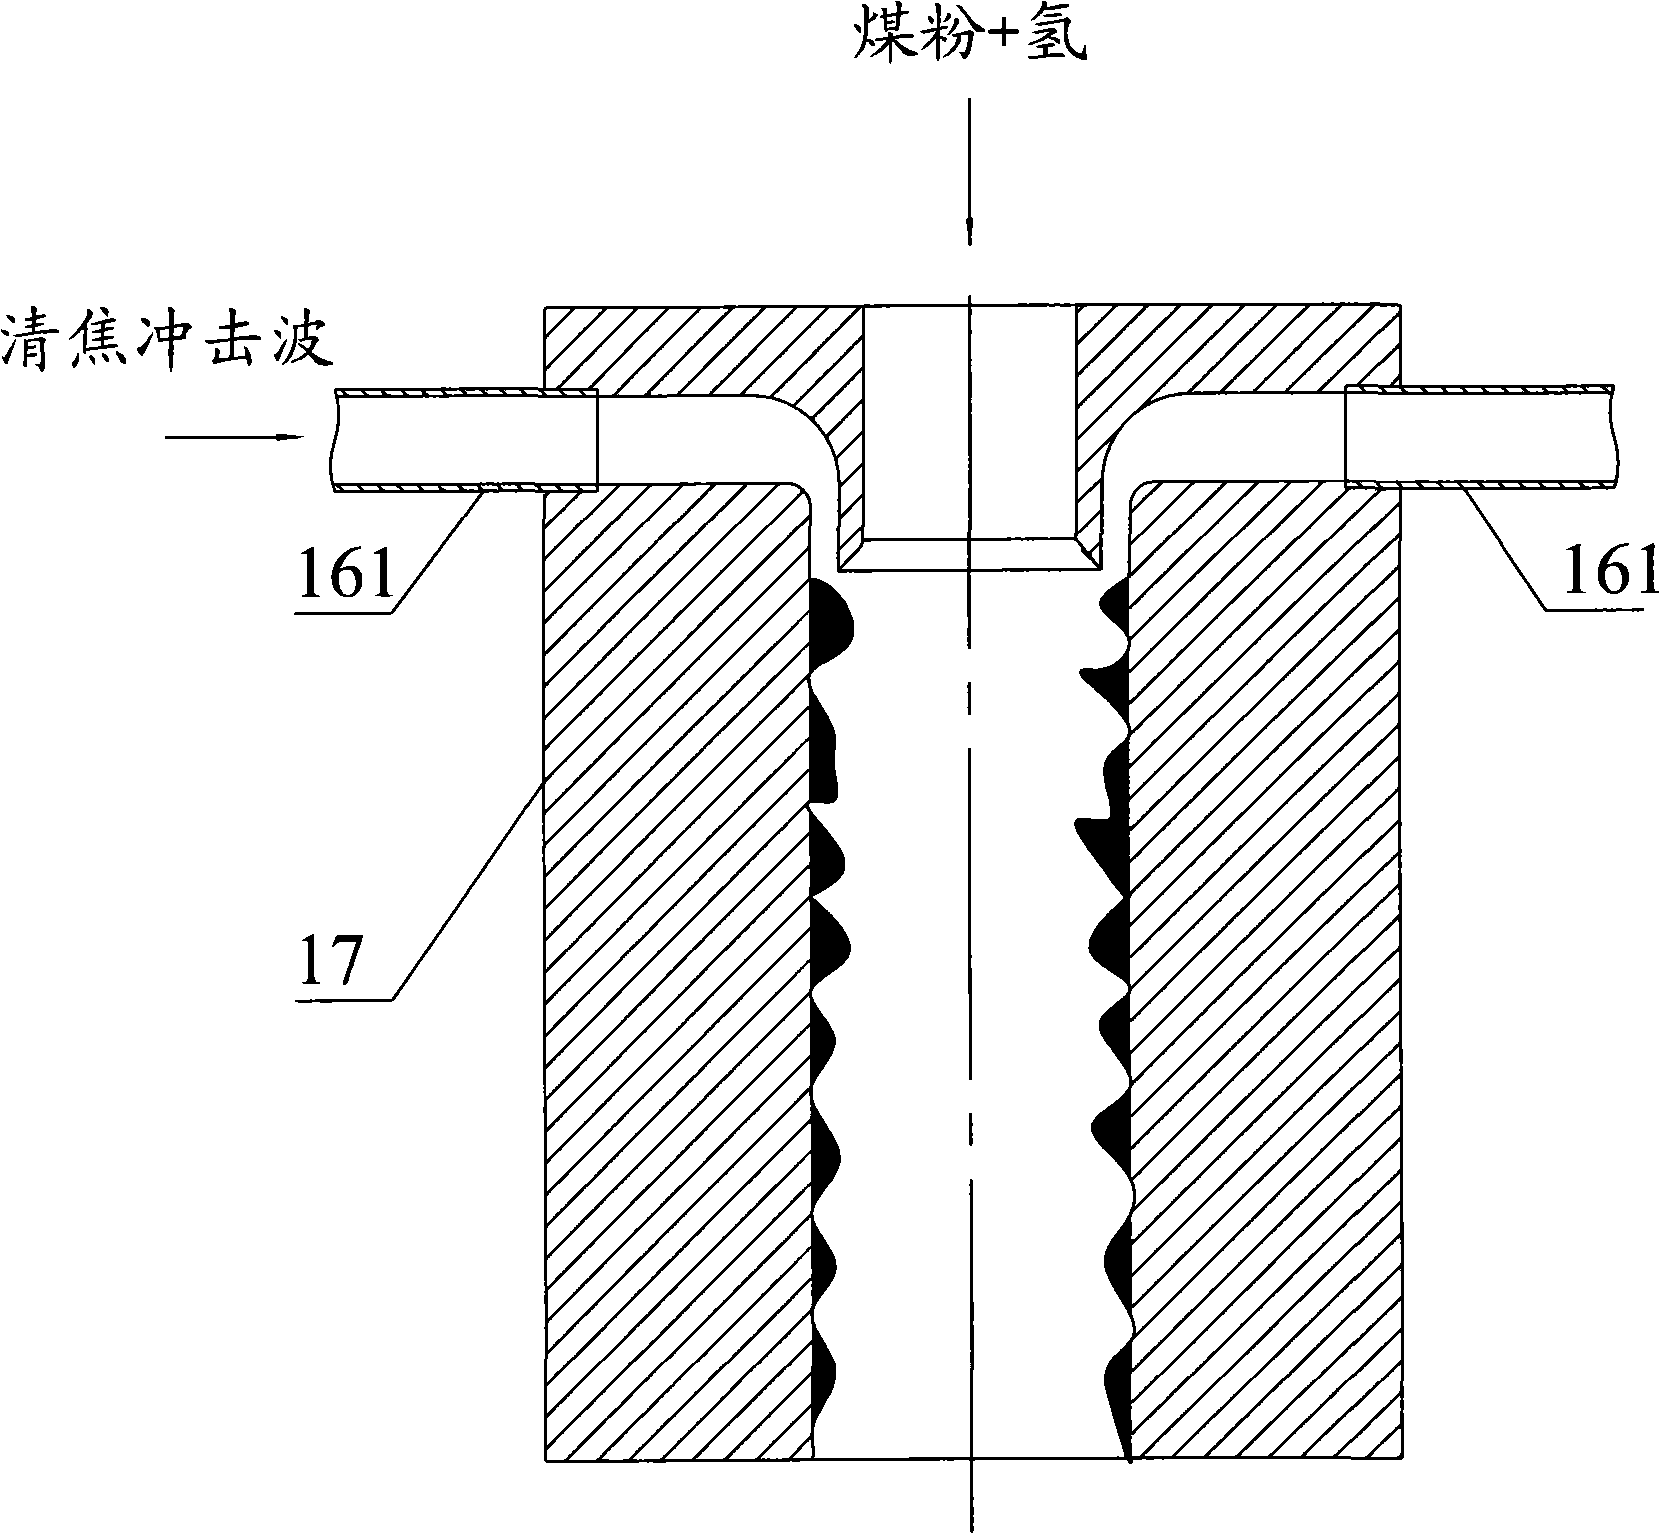 Coke cleaning system and method for plasma cracking reactor